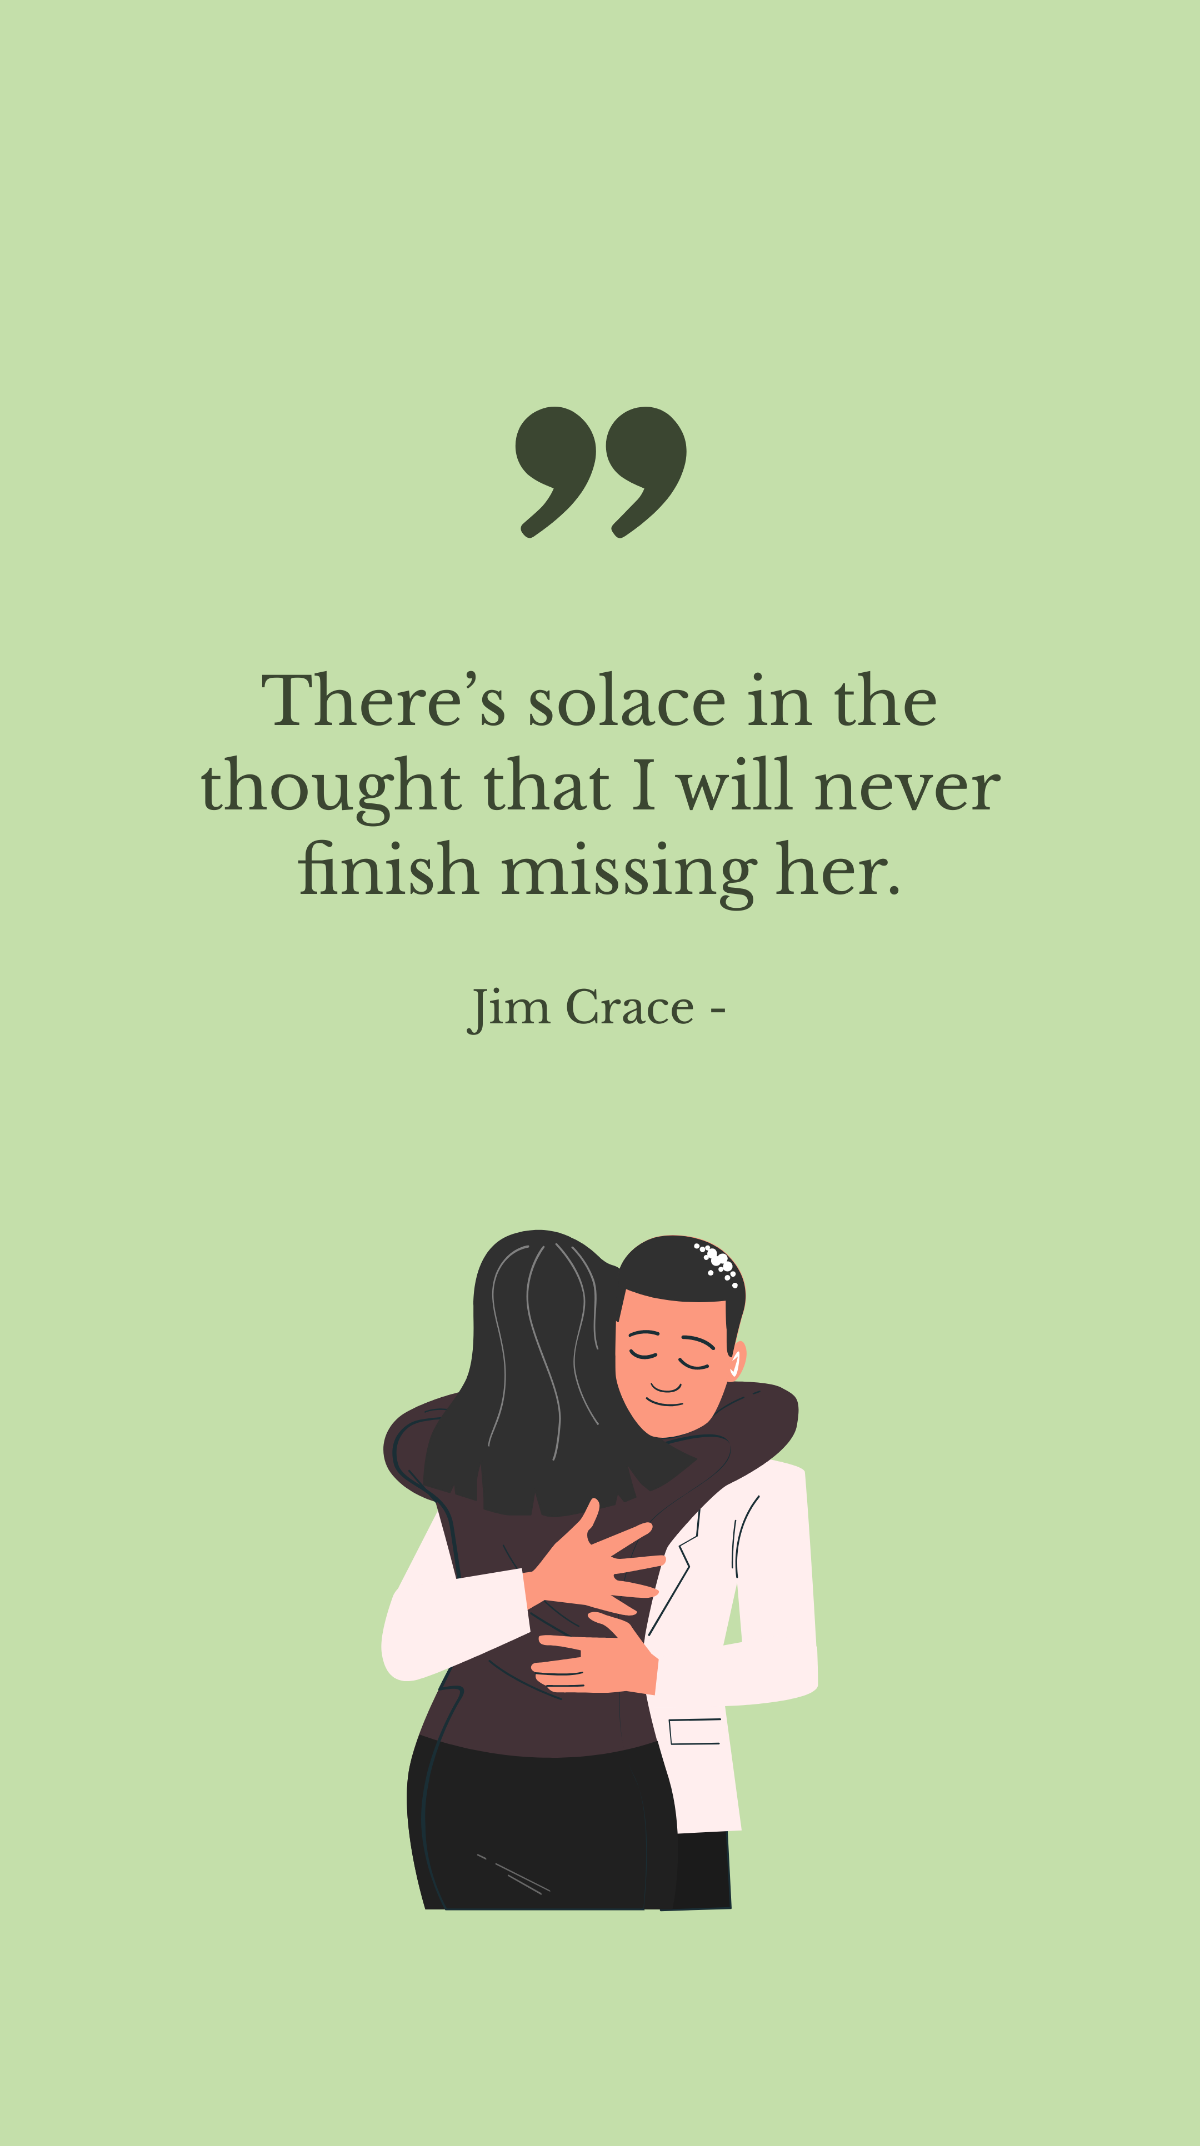 Free Jim Crace - There’s solace in the thought that I will never finish missing her. Template